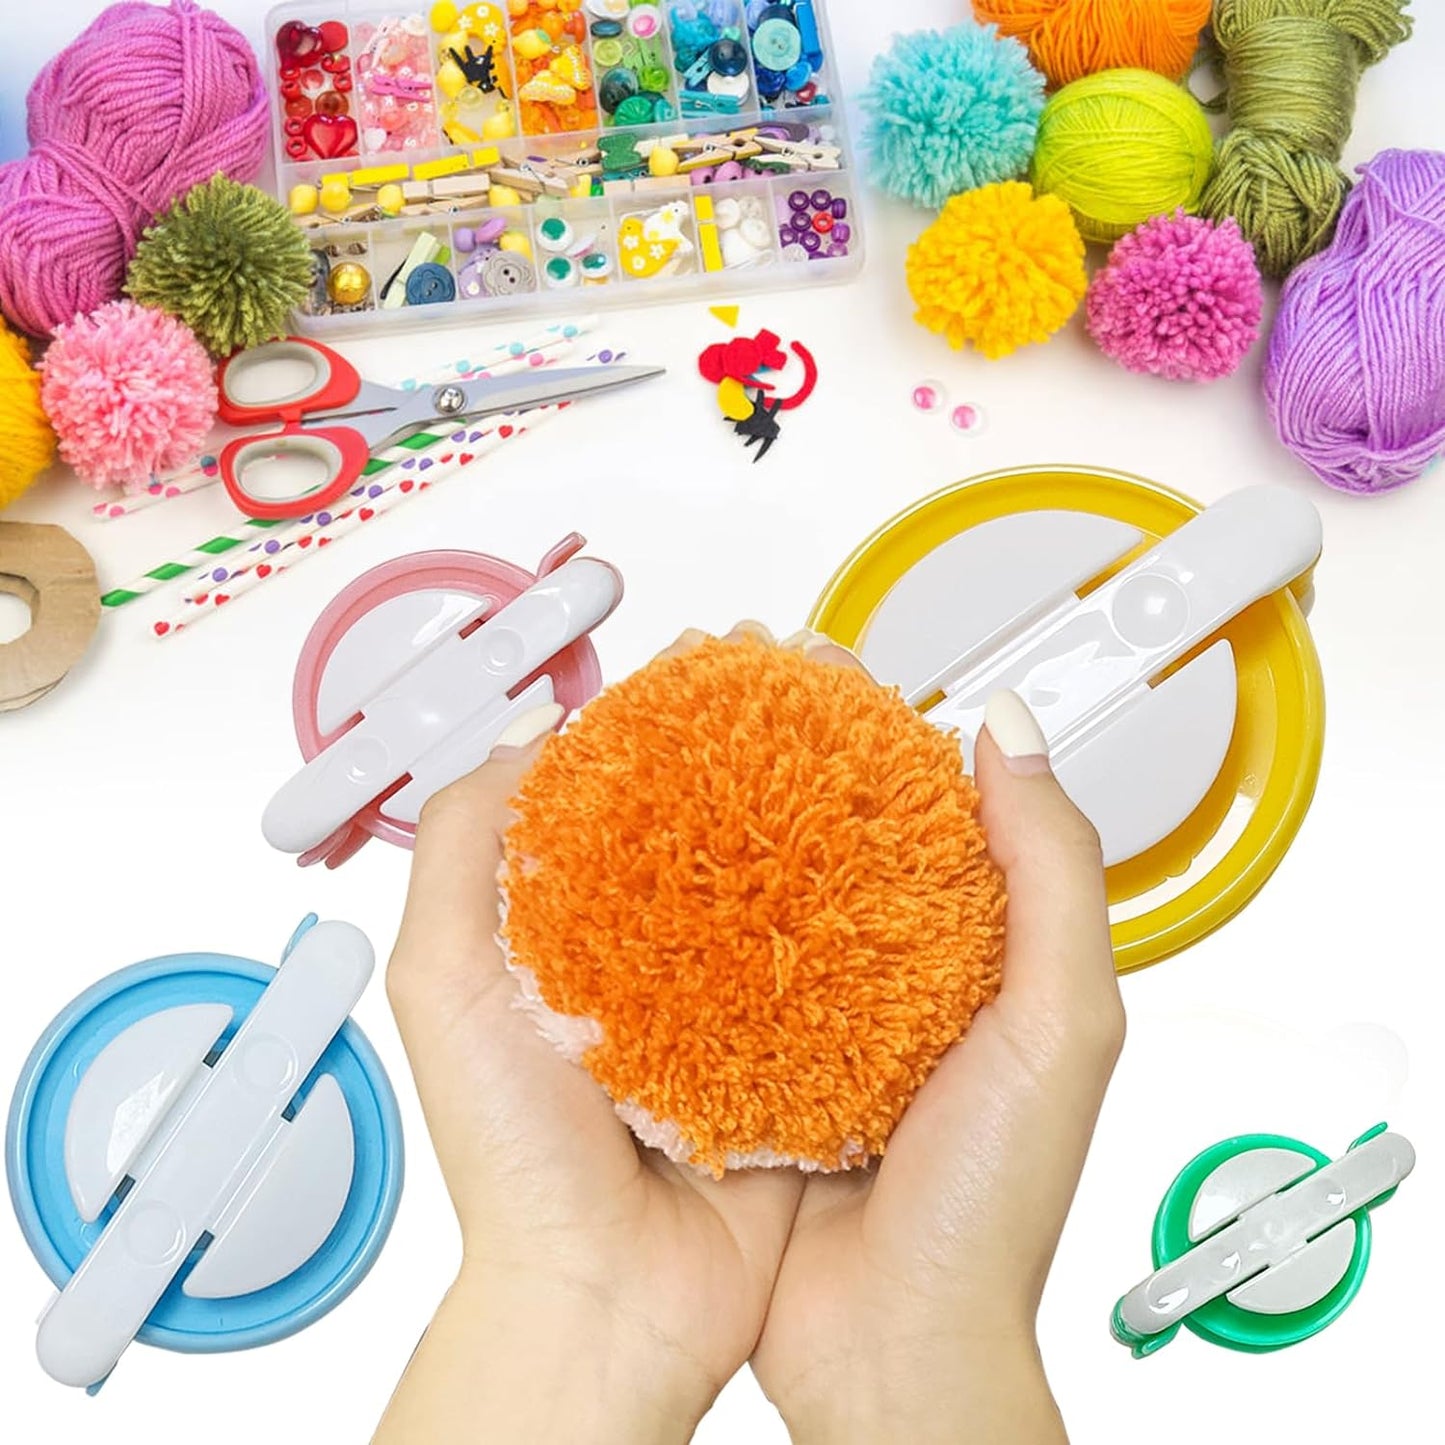 Pompom Makers 4 Size Pom Poms Maker Tool Set DIY Fluff Ball Weaver for DIY Wool Yarn Knitting Craft Project with Cutter Scissors (Style A)